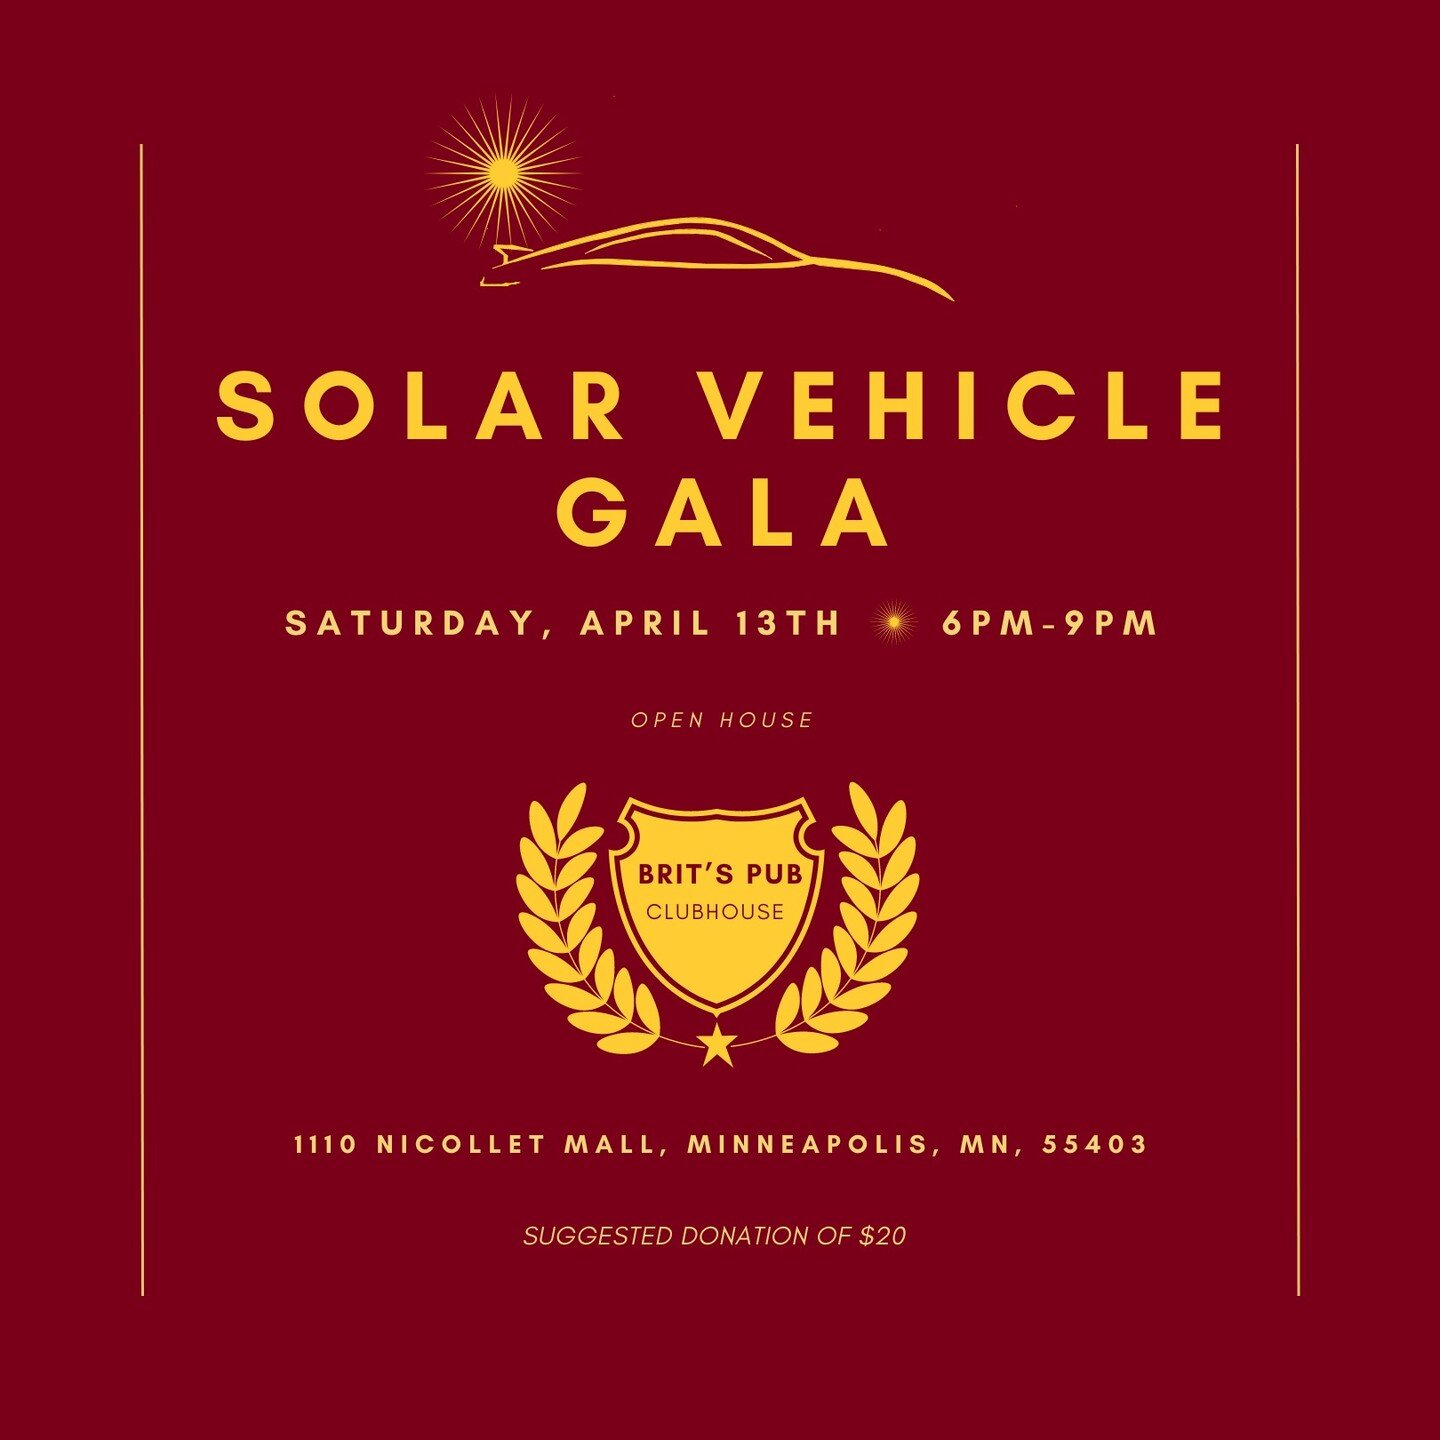 This is a reminder that the Solar Vehicle Gala is going to be held on April 13, 2024. Be sure to RSVP for the event. See you all soon!

When: April 13 6:00-9:00 PM
Where: Brit&rsquo;s Pub Club House
Address: 1110 Nicollet Mall, Minneapolis, MN 55403
